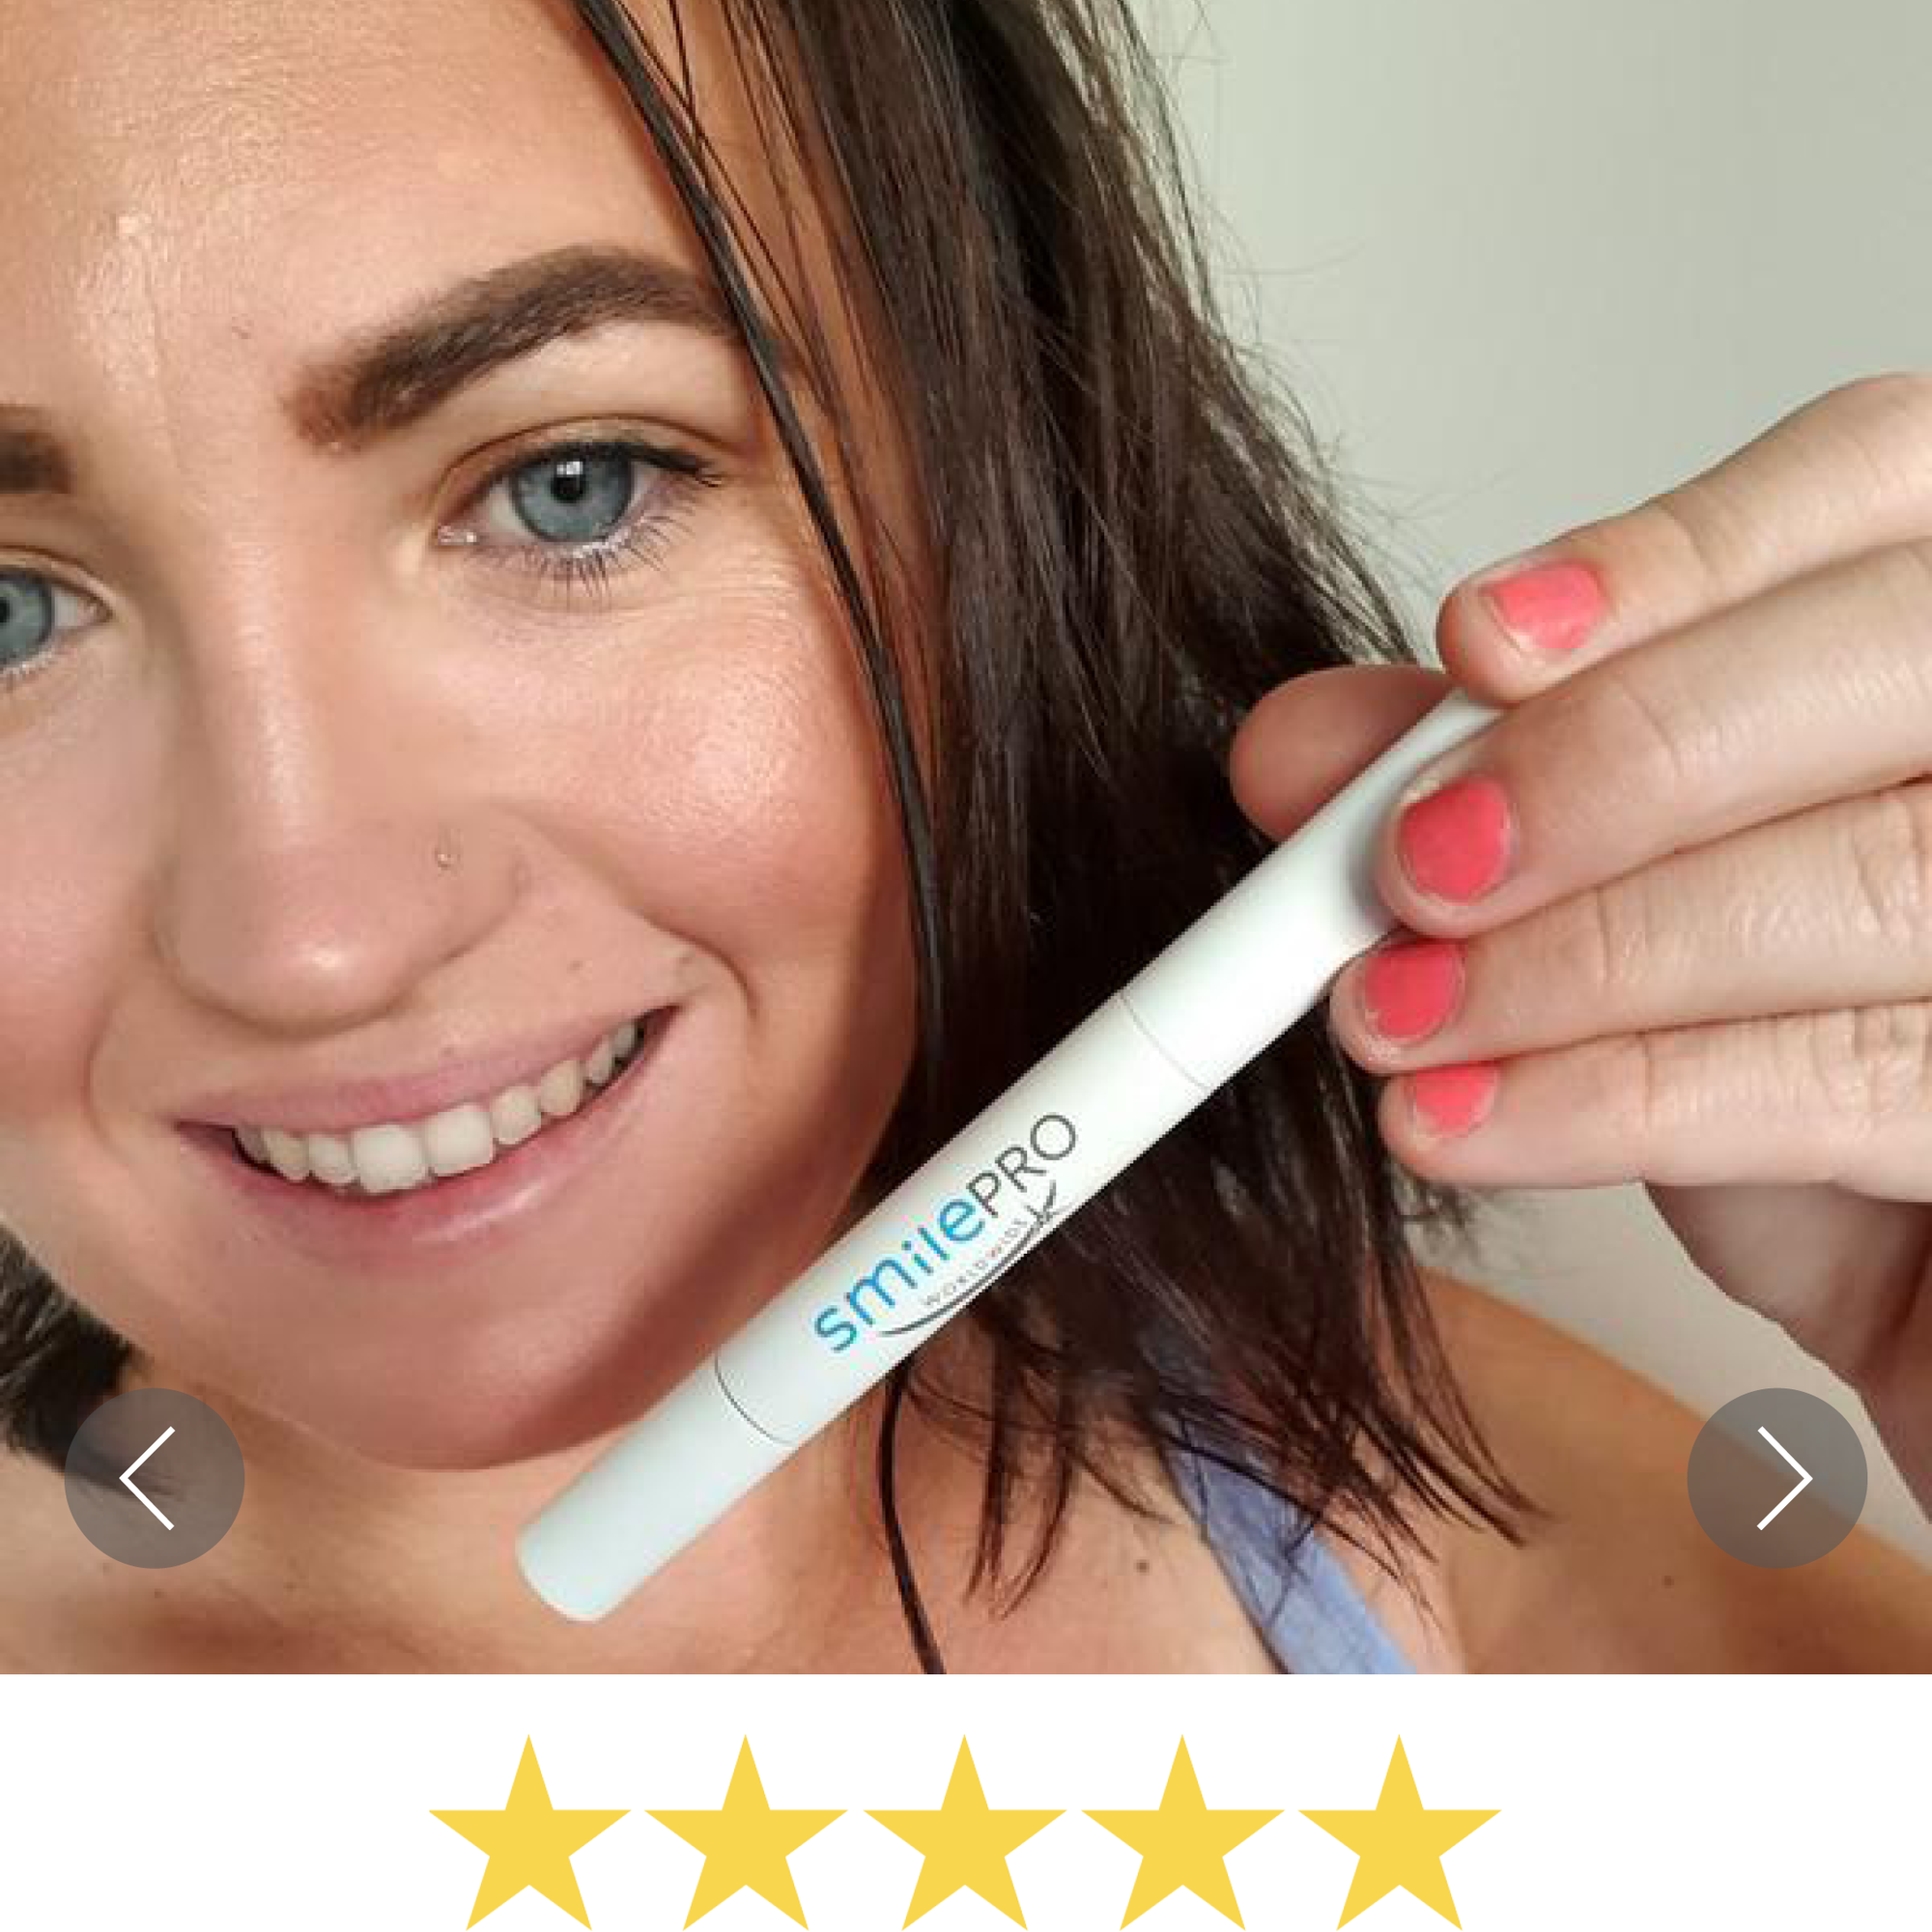 At home teeth whitening that works, easy to use, affordable.